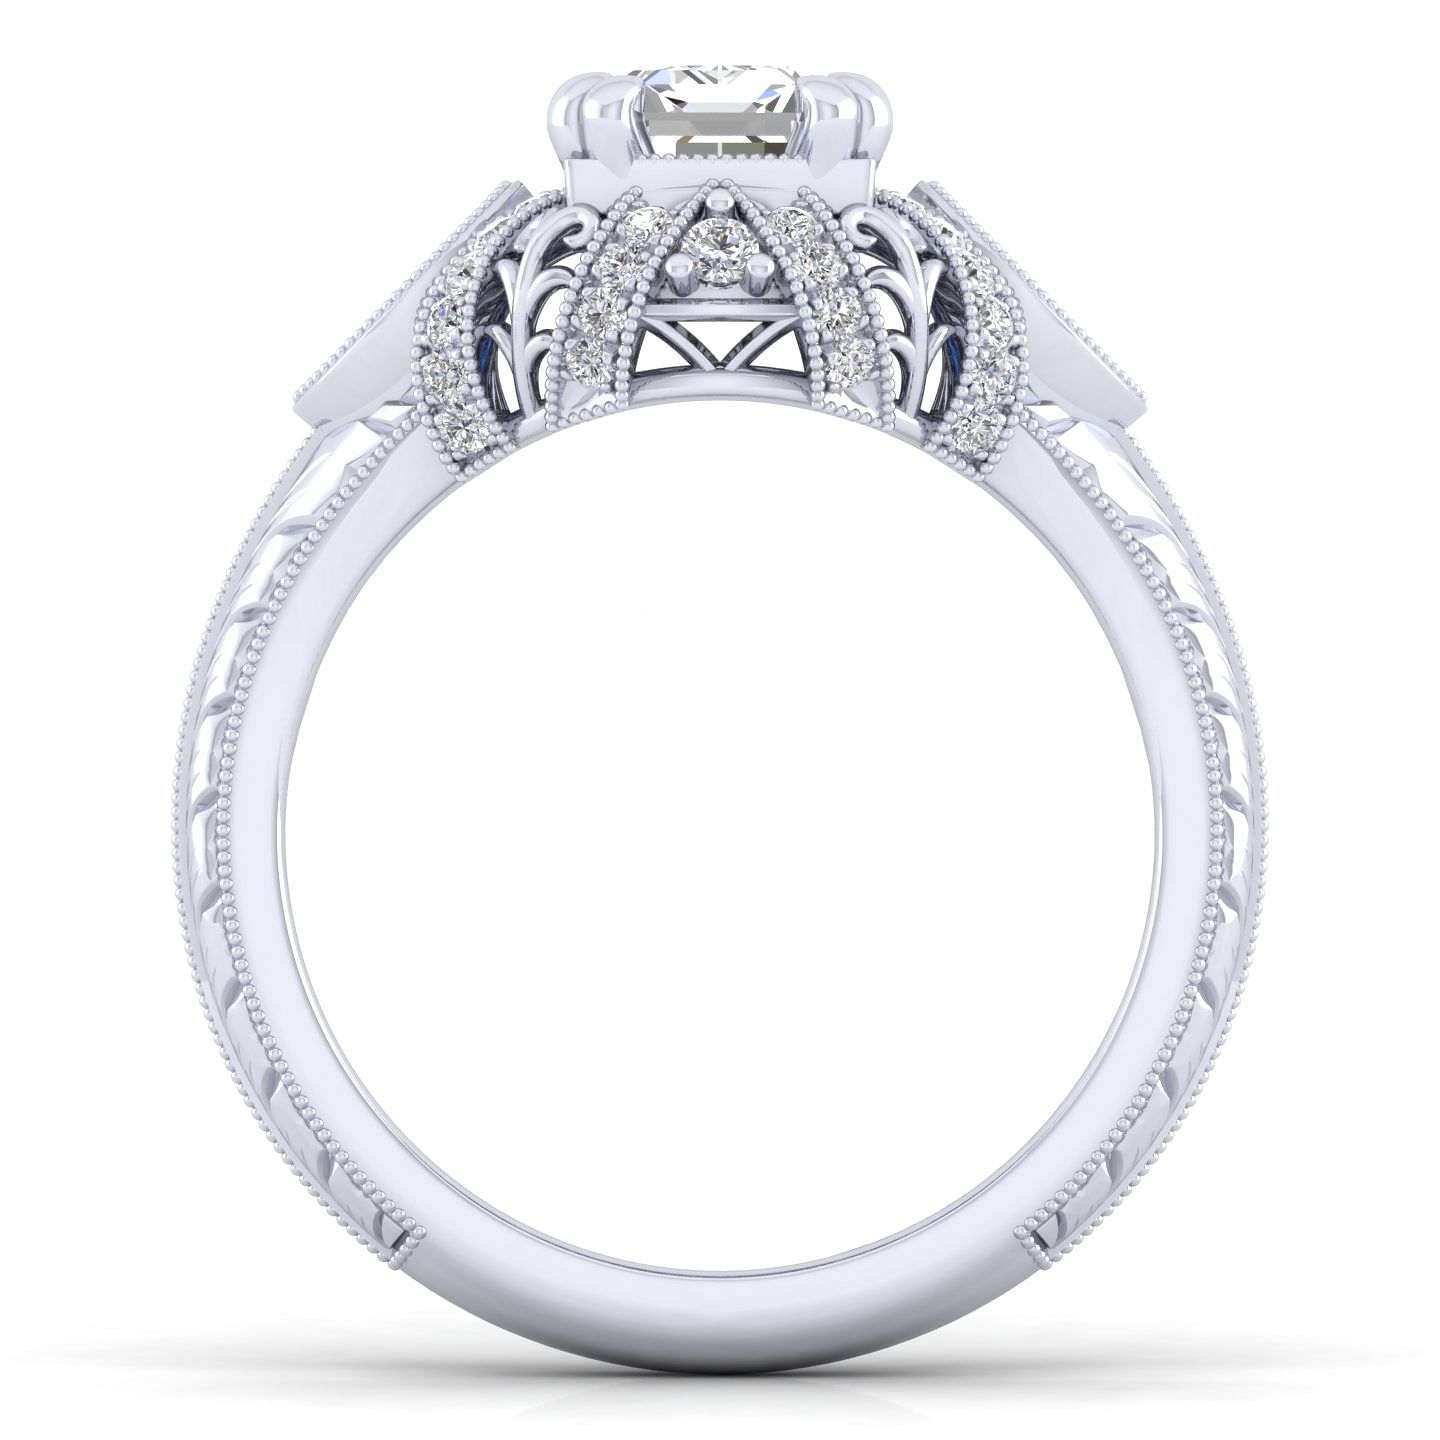 Vintage Inspired 14K White Gold Halo Emerald Cut Three Stone Sapphire and Diamond Engagement Ring